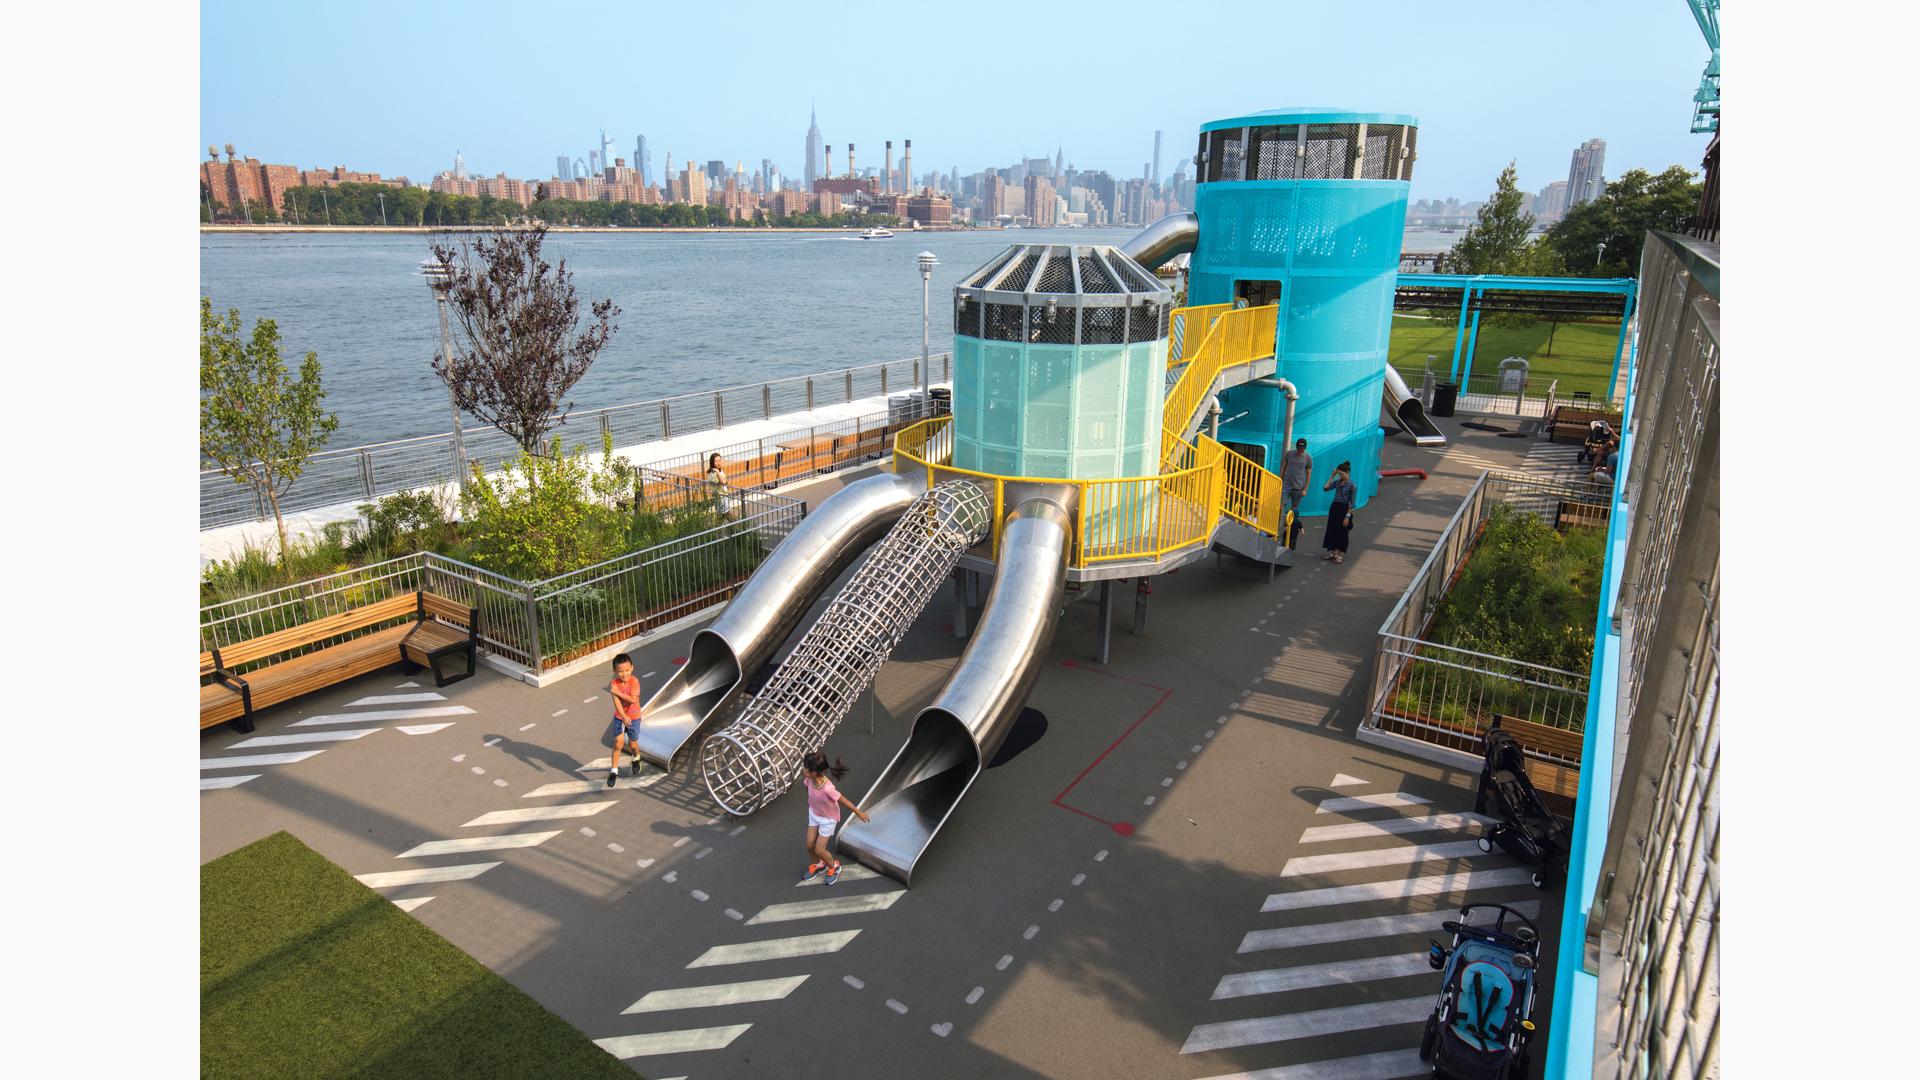 Historic Domino Sugar Factory in Brooklyn, NY turns into a community play space inspired by artist Mark Reigelman with bridge, beautiful colors and stainless steel slides.